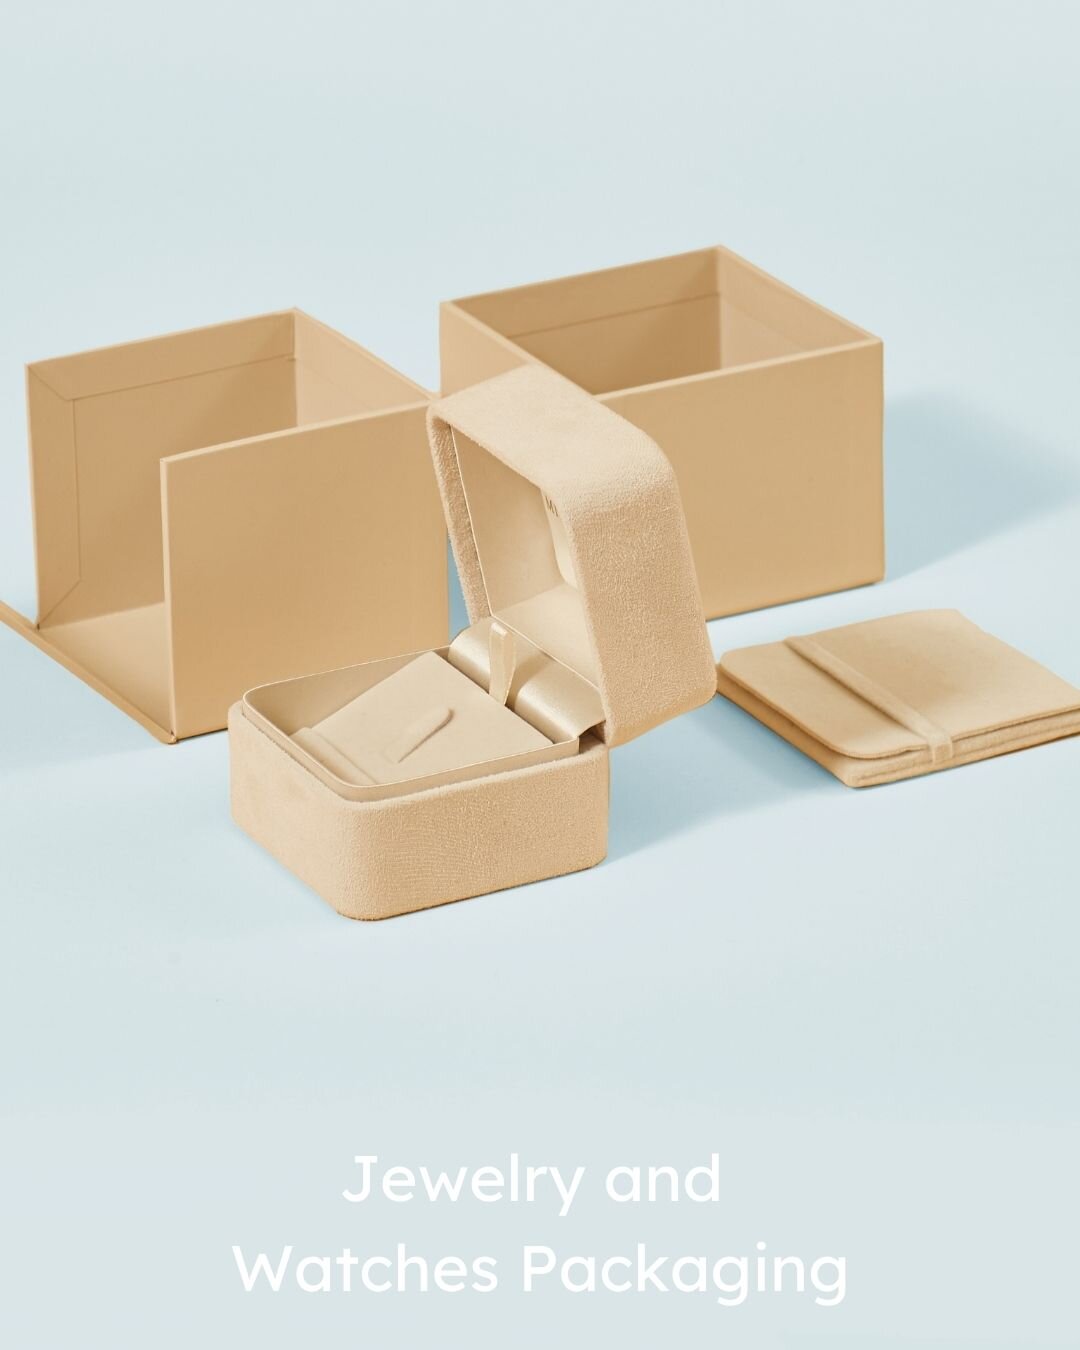 JEWELRY AND WATCHES PACKAGING